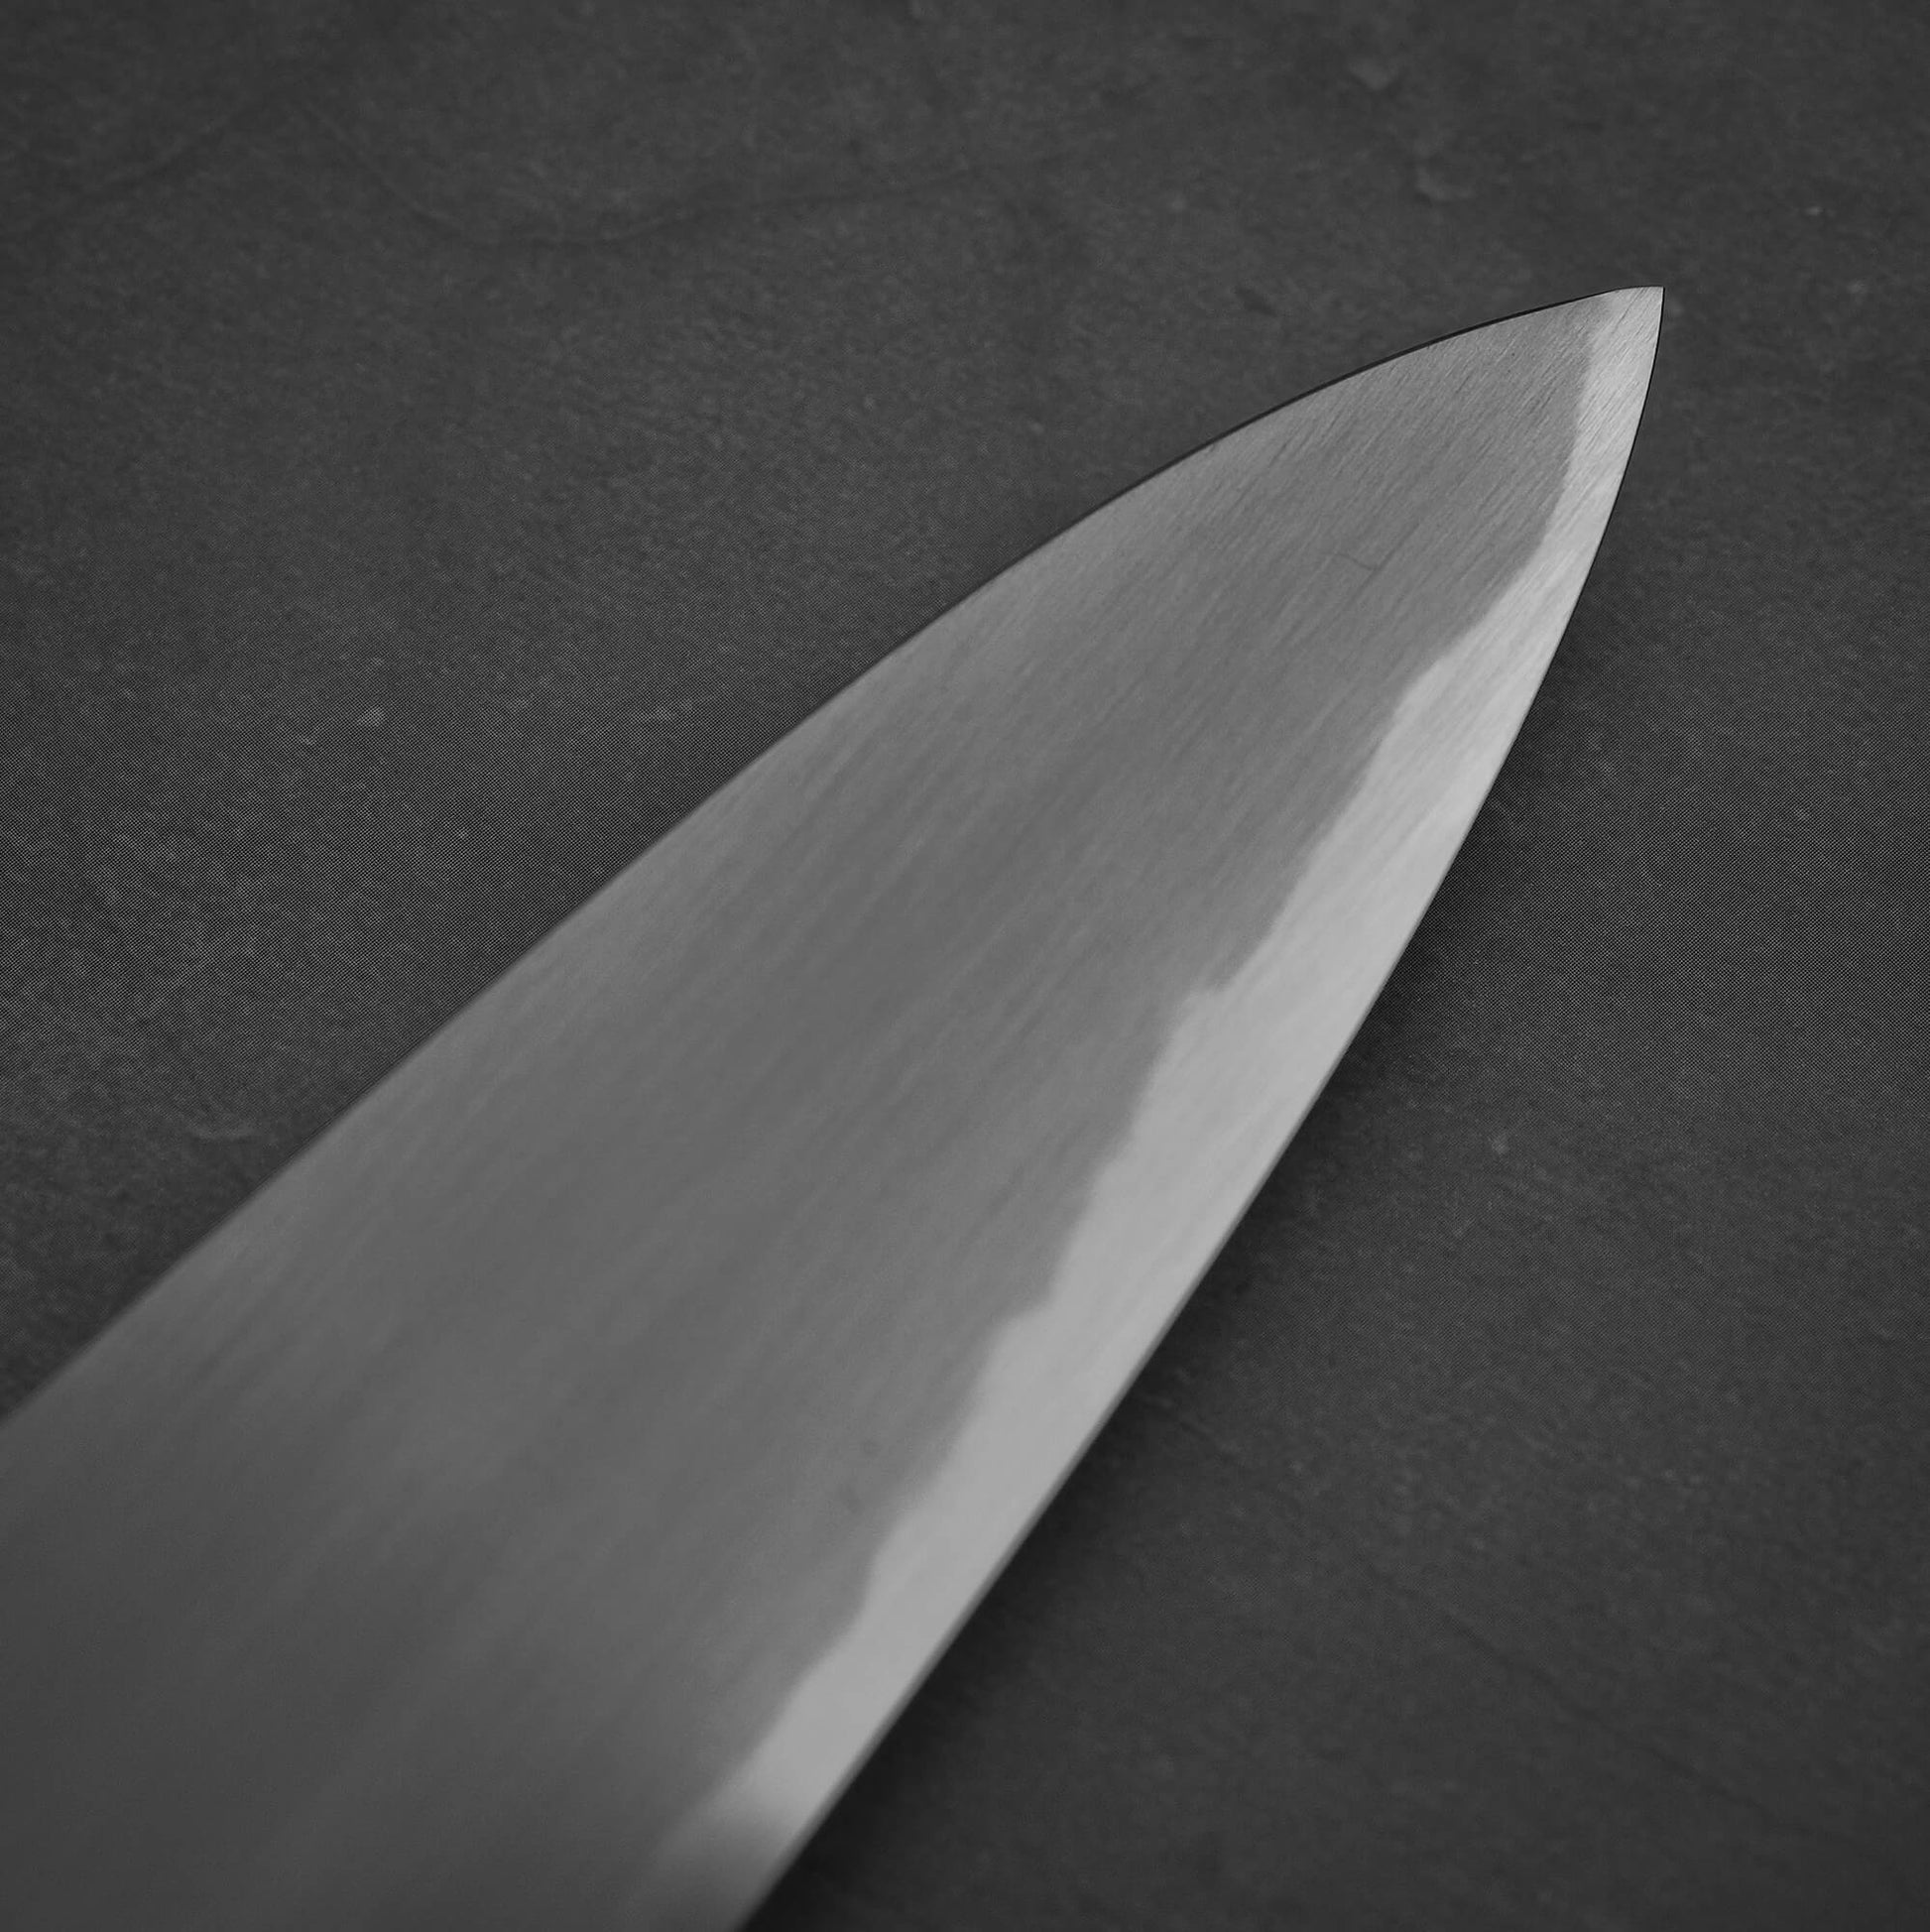 Close up view of the tip area of Nakagawa aogami#2 gyuto knife. Image shows right side of the blade.